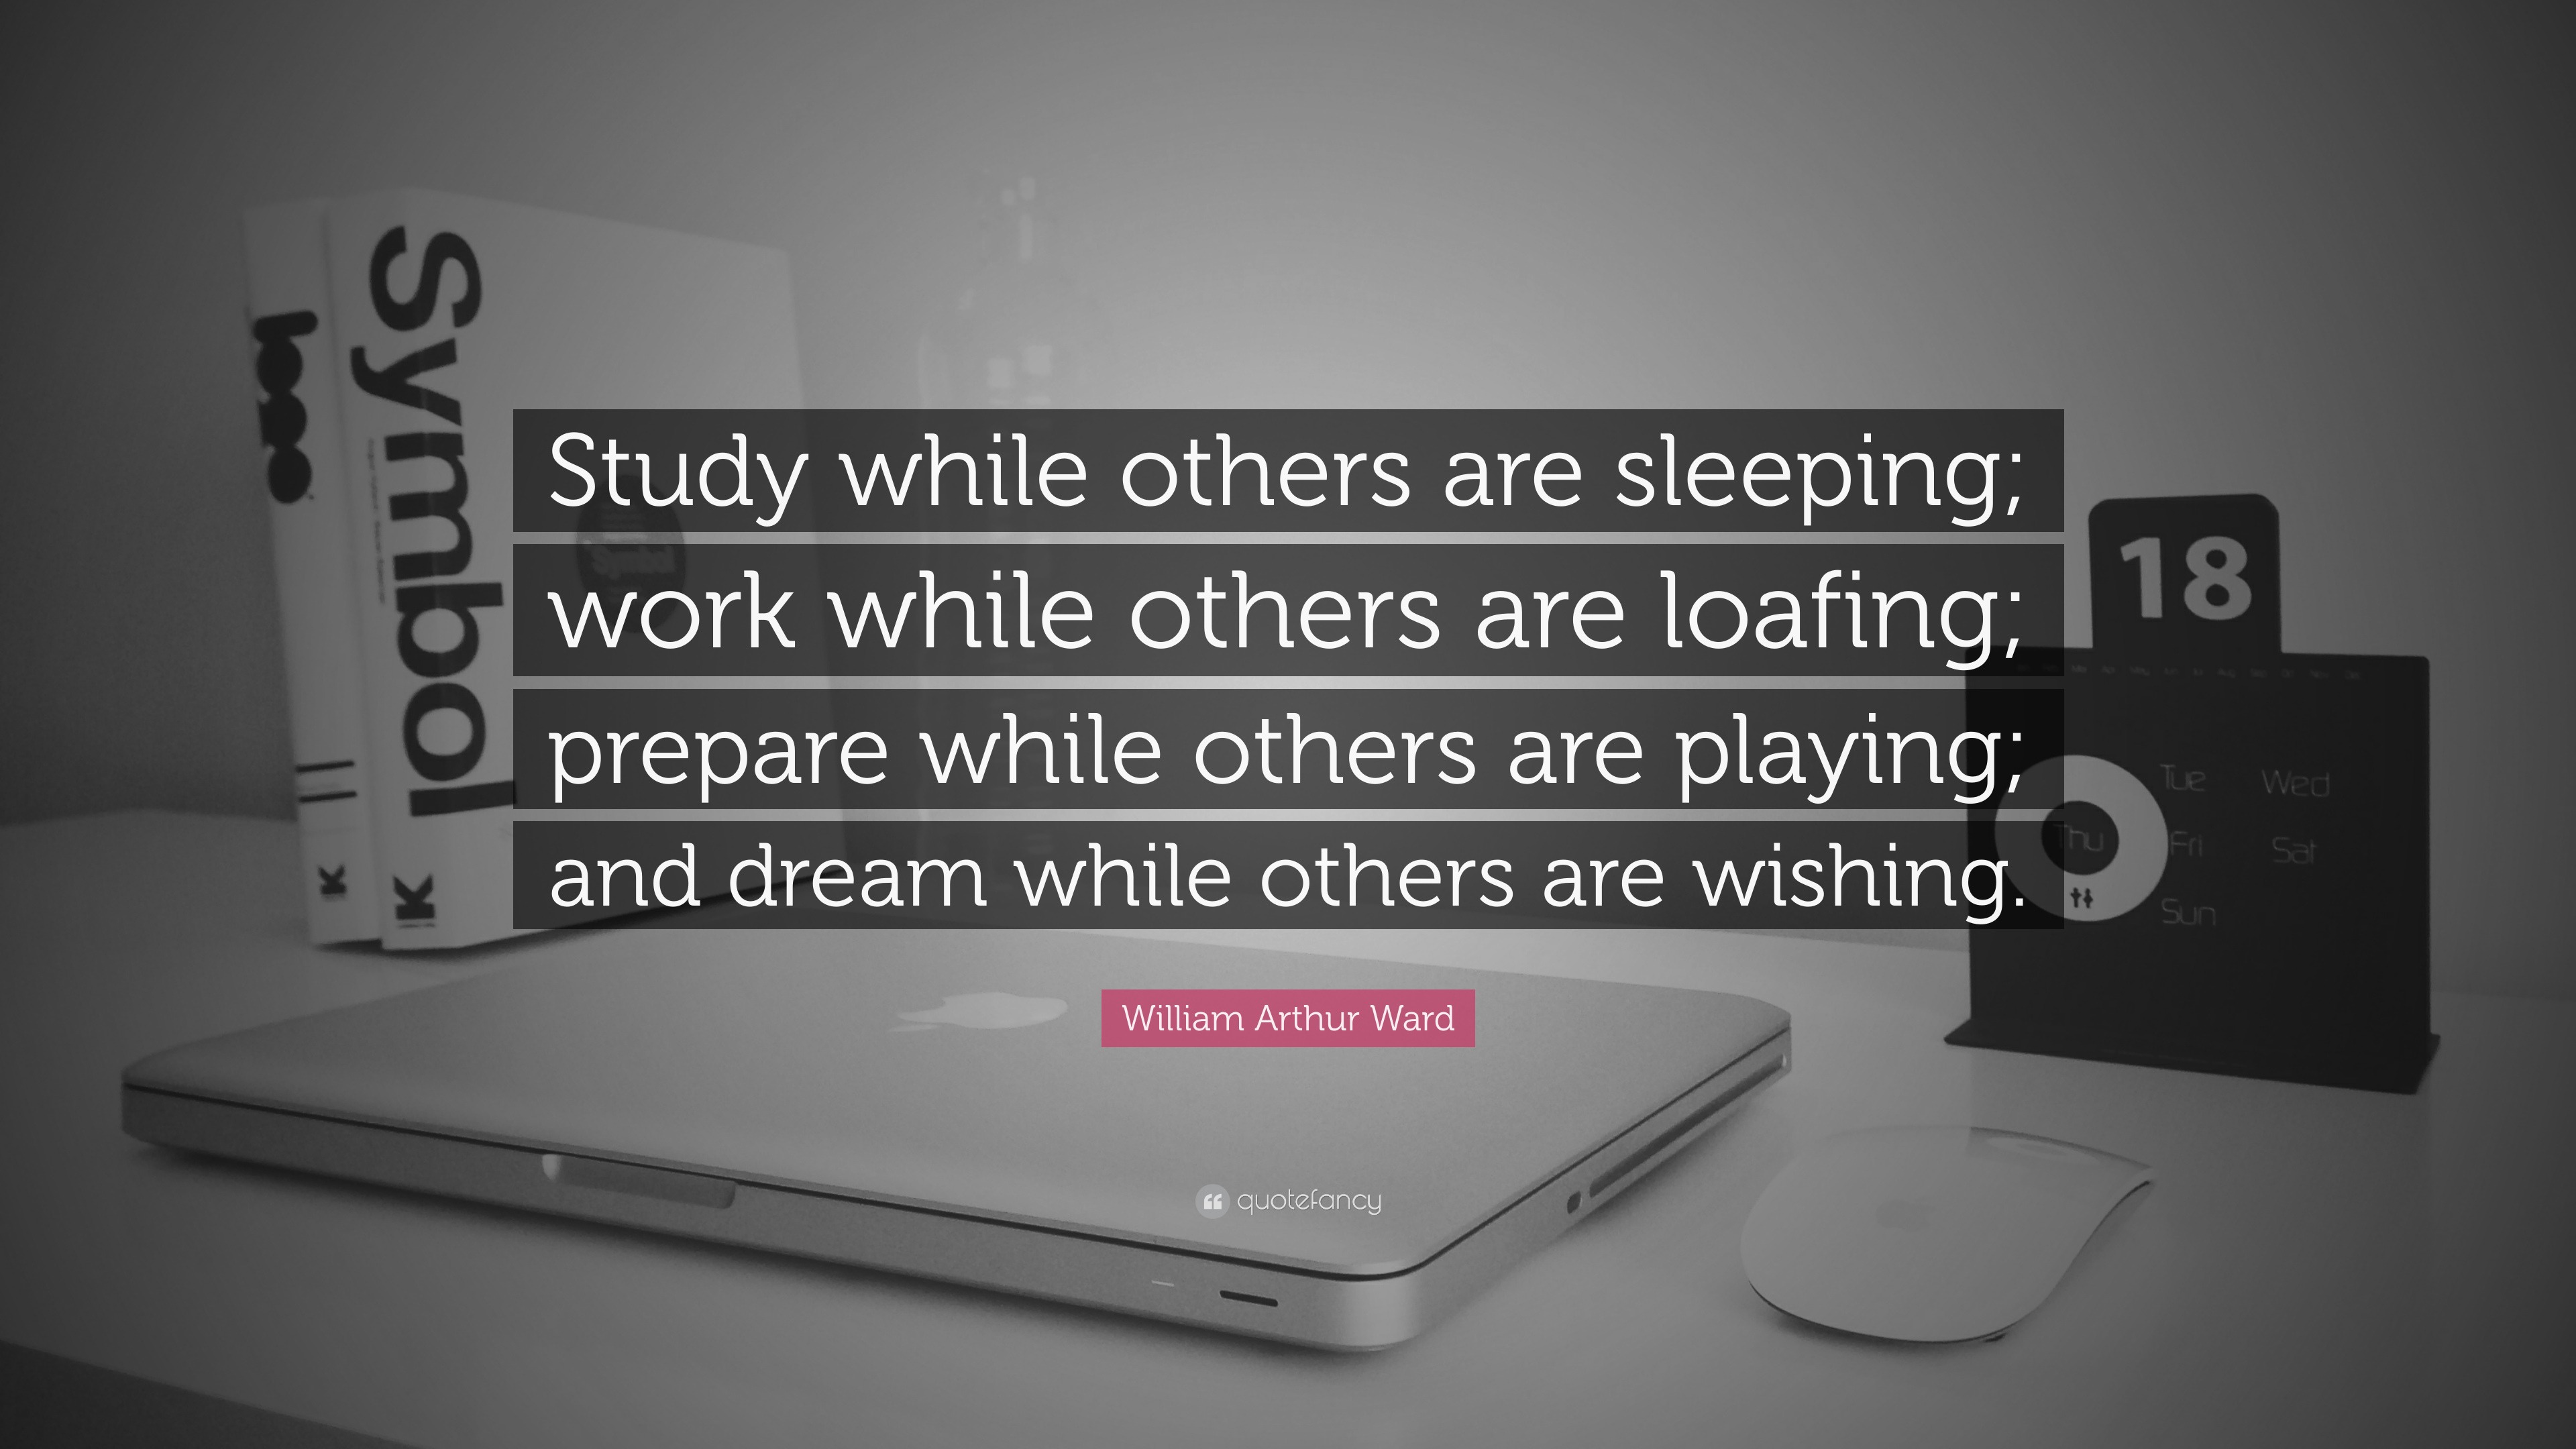 William Arthur Ward Quote: “Study while others are sleeping; work while  others are loafing; prepare while others are playing; and dream while  others...”